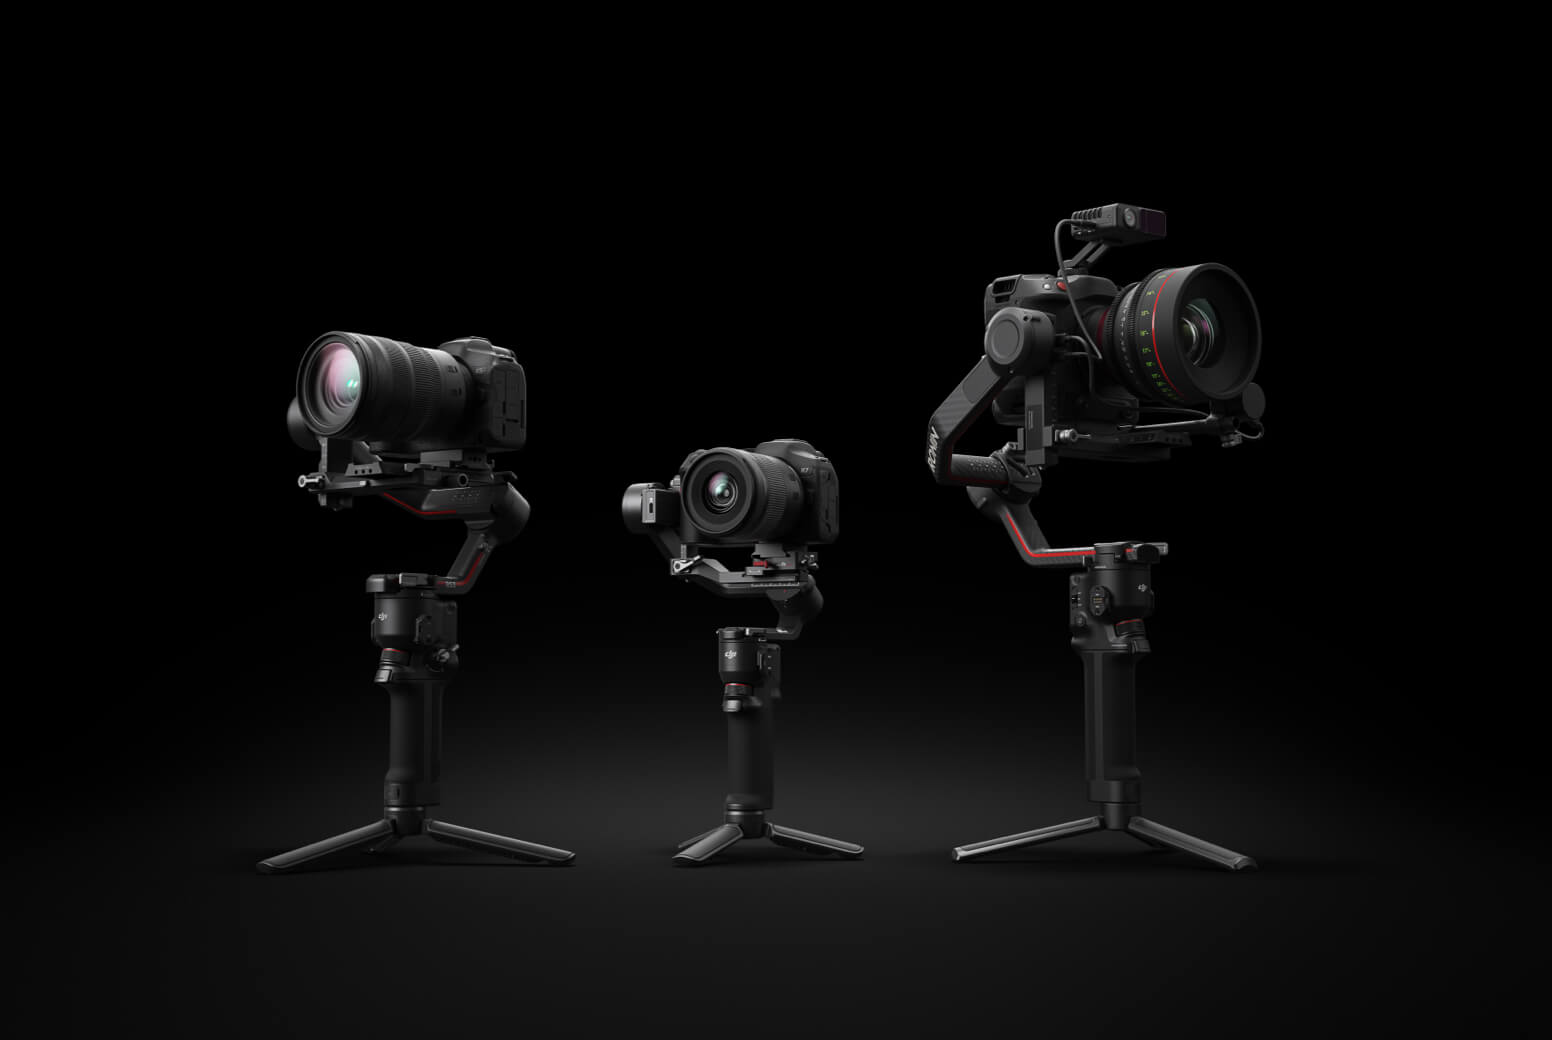 Need a Camera Stabilizer? Explore the Ronin Line